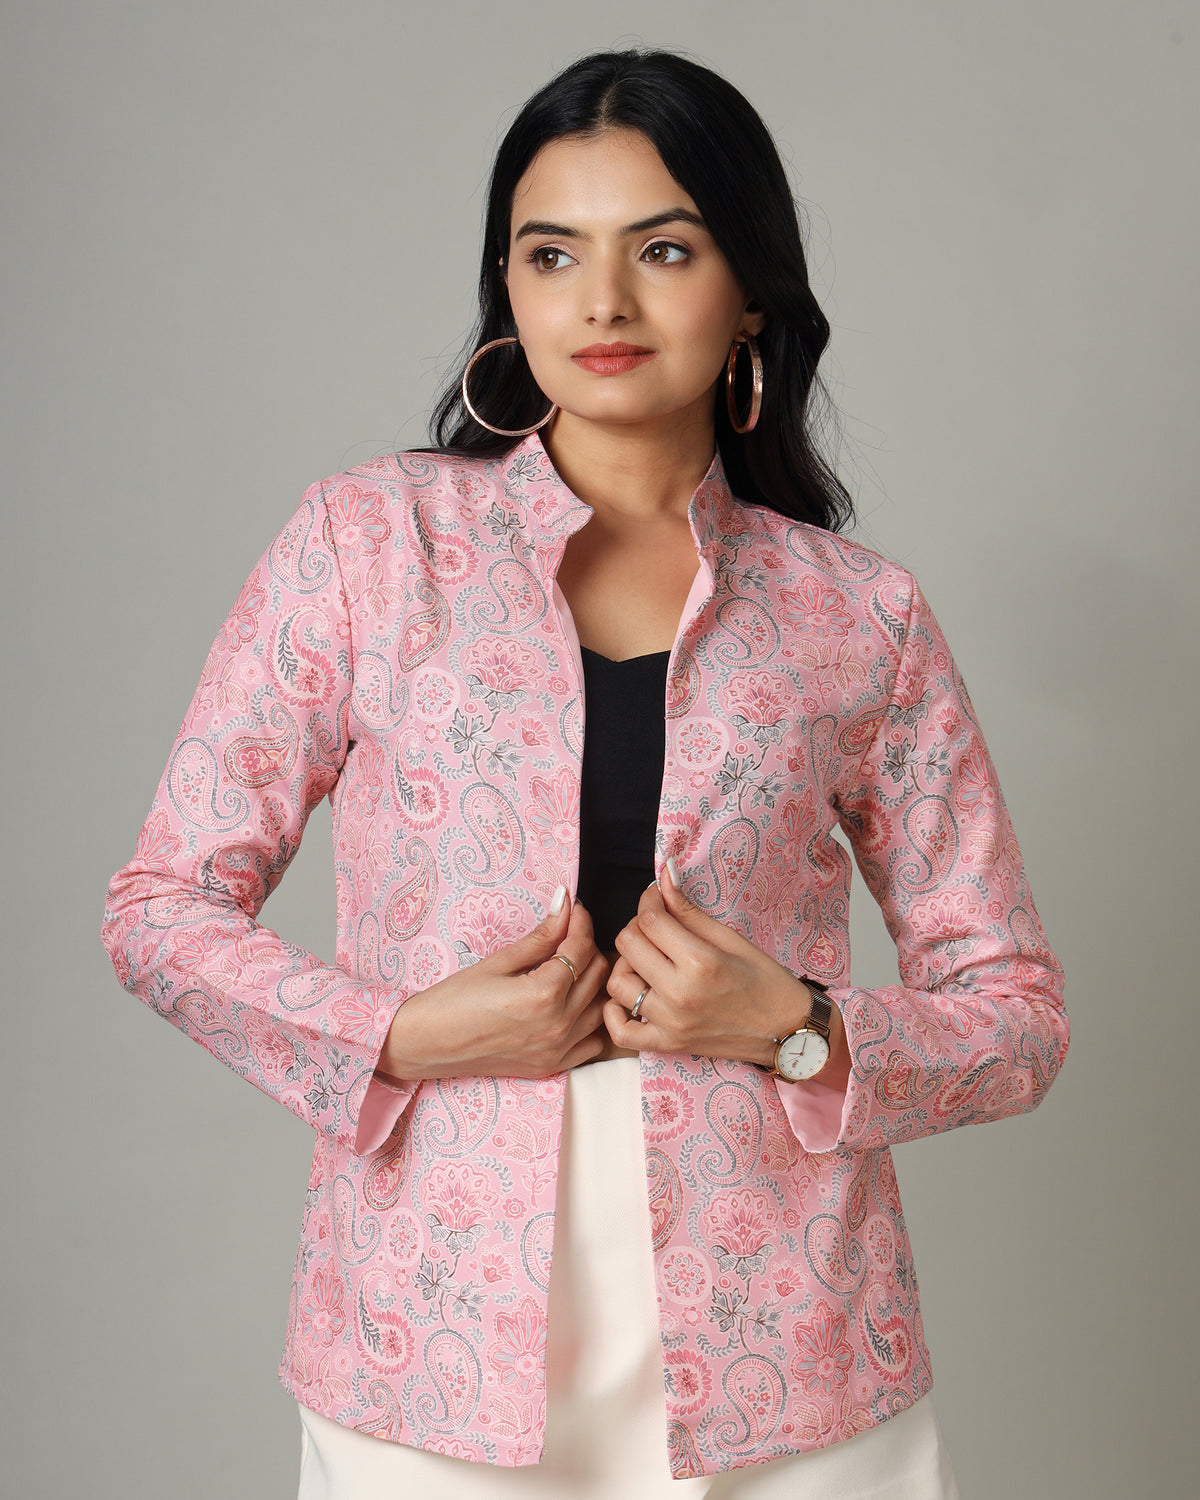 Elevate Your Look With This Stunning Women's Jacket